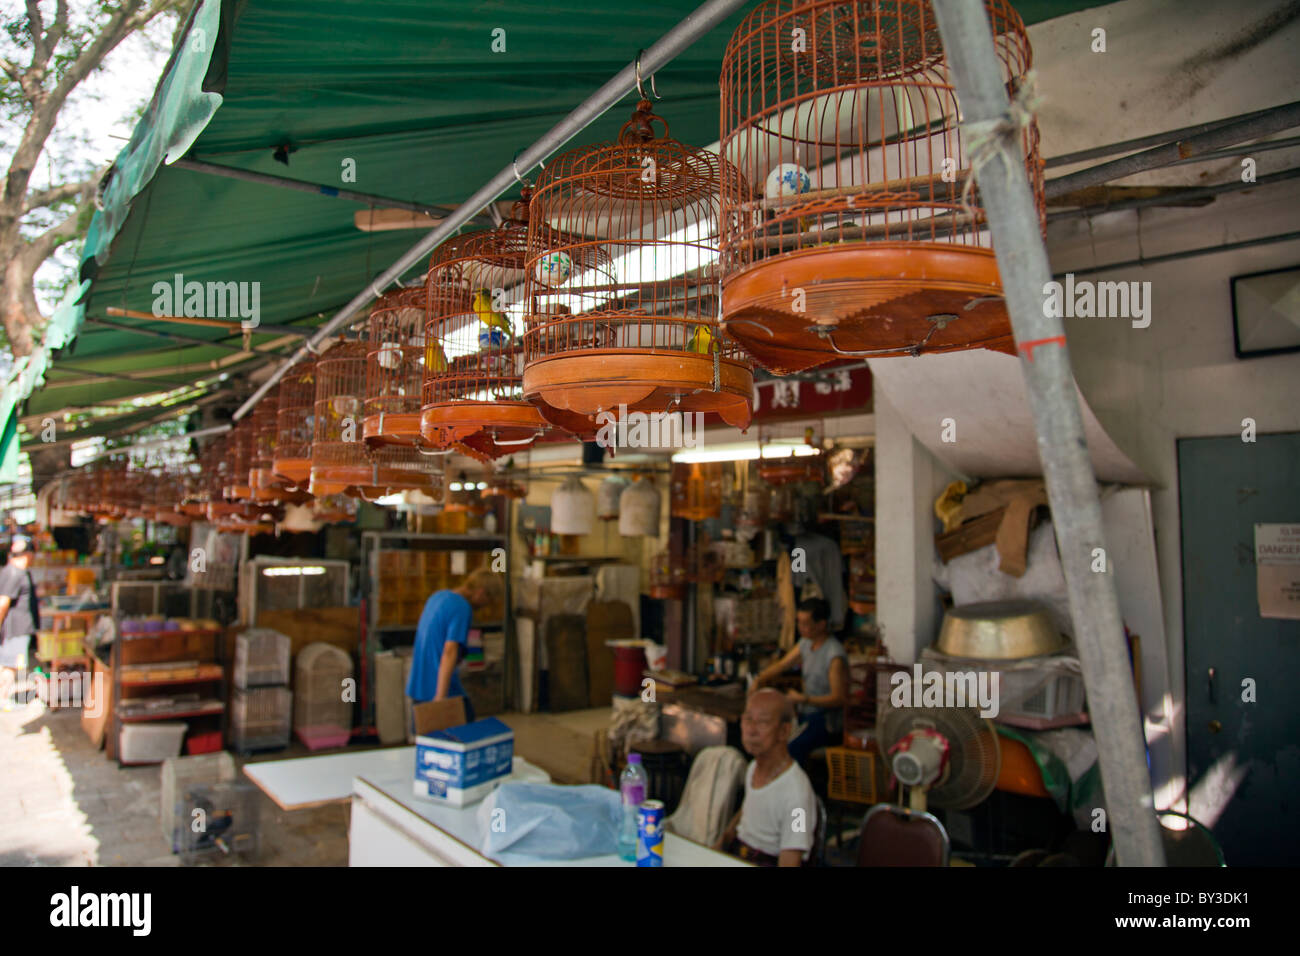 Kowloon, Hong Kong bird garden on Yuen Po Street, see the birds caged ready for sale or show Stock Photo